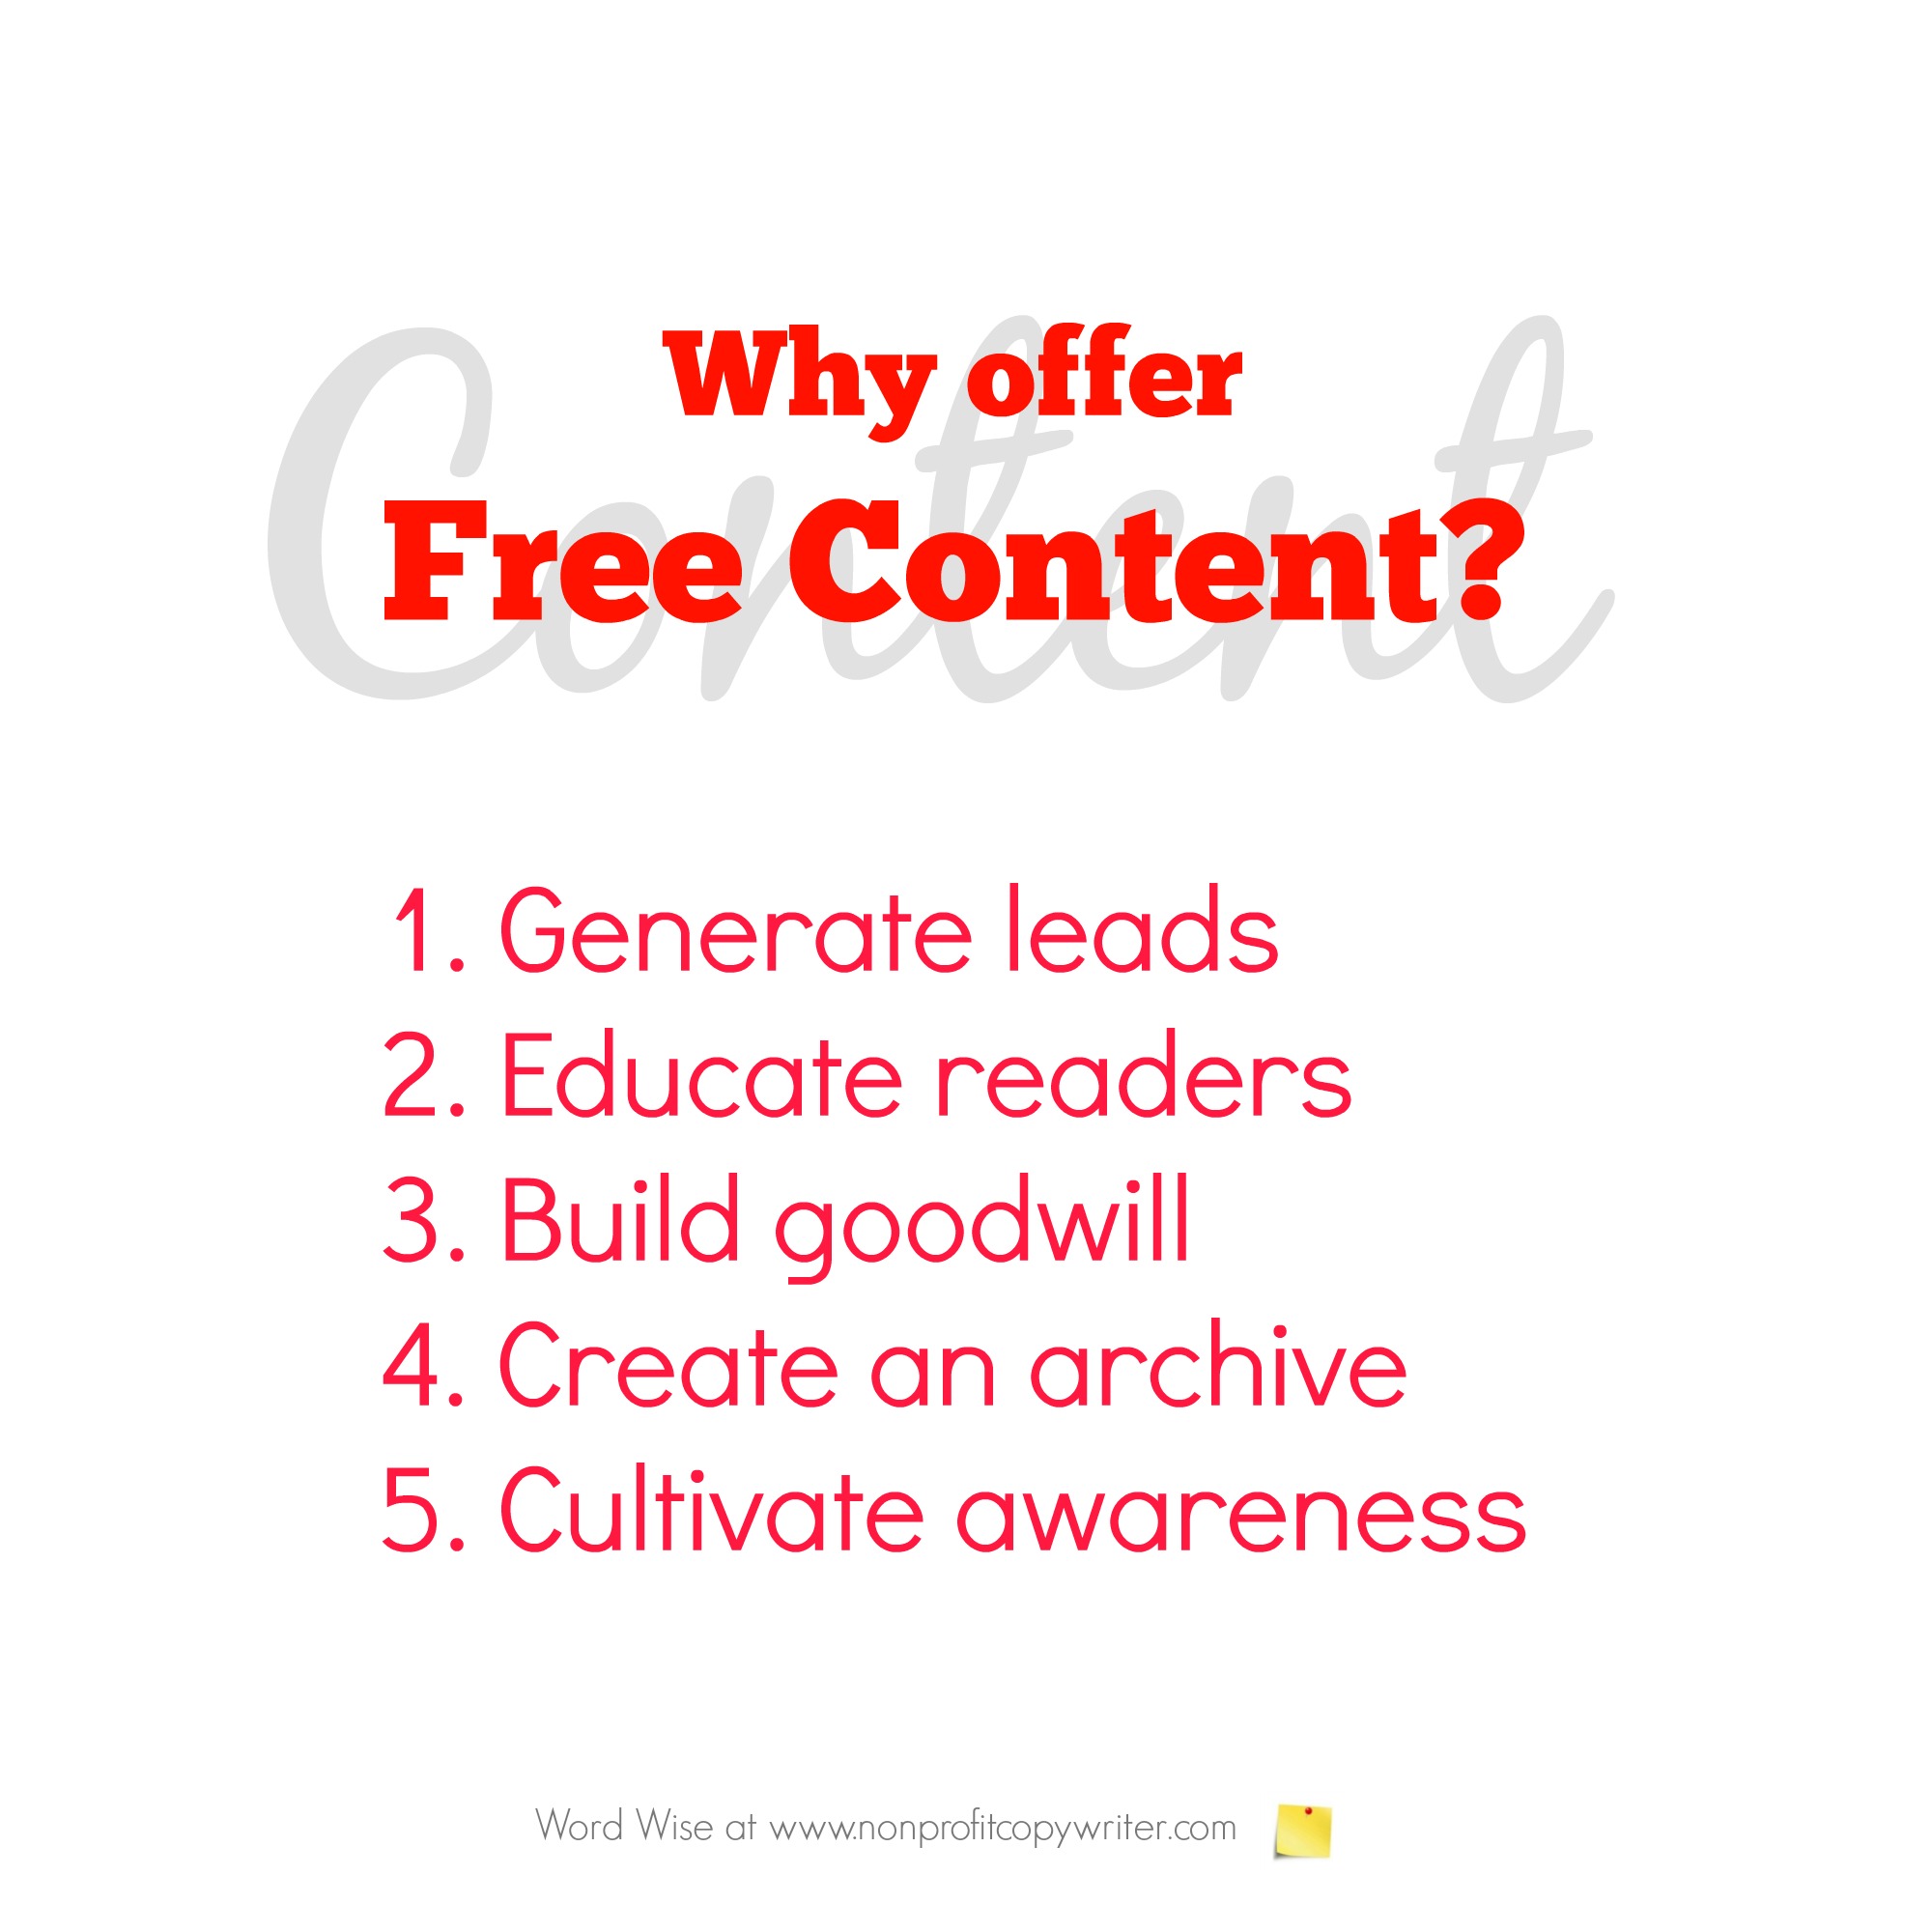 Why offer free content? With Word Wise at Nonprofit Copywriter